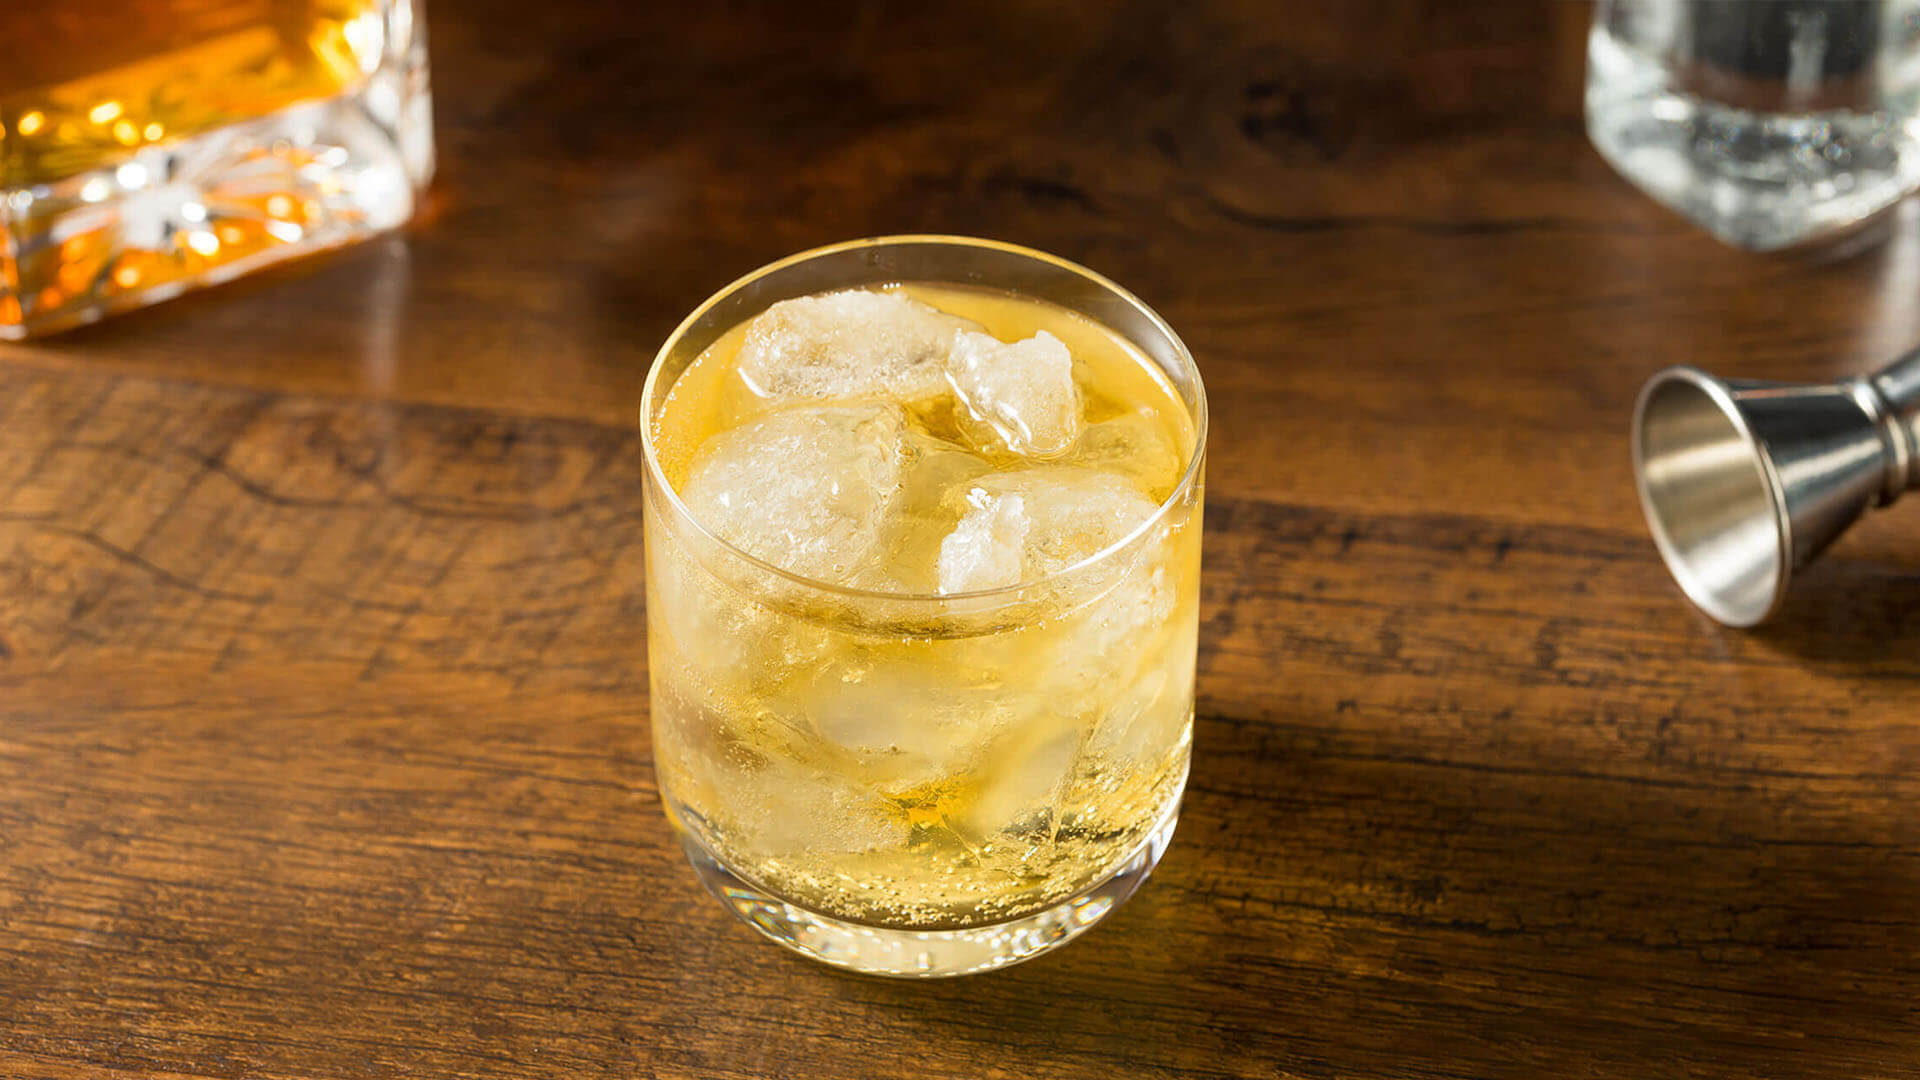 Scotch and Soda - Cocktail Recipe by East Imperial